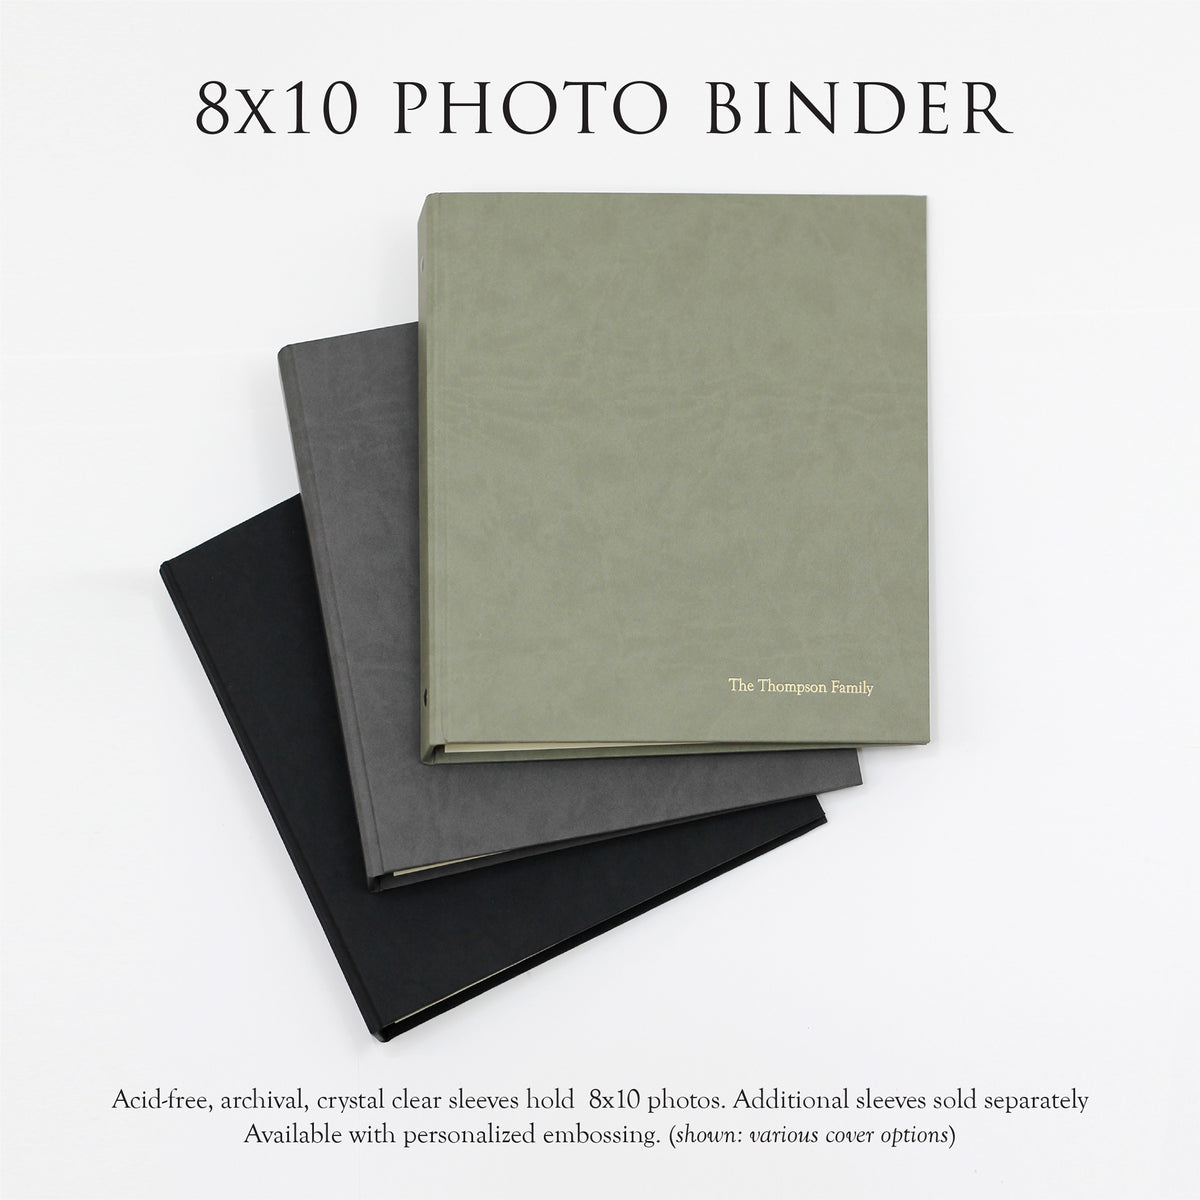 Large Photo Binder For 8x10 Photos | Cover: Mango Cotton | Available Personalized